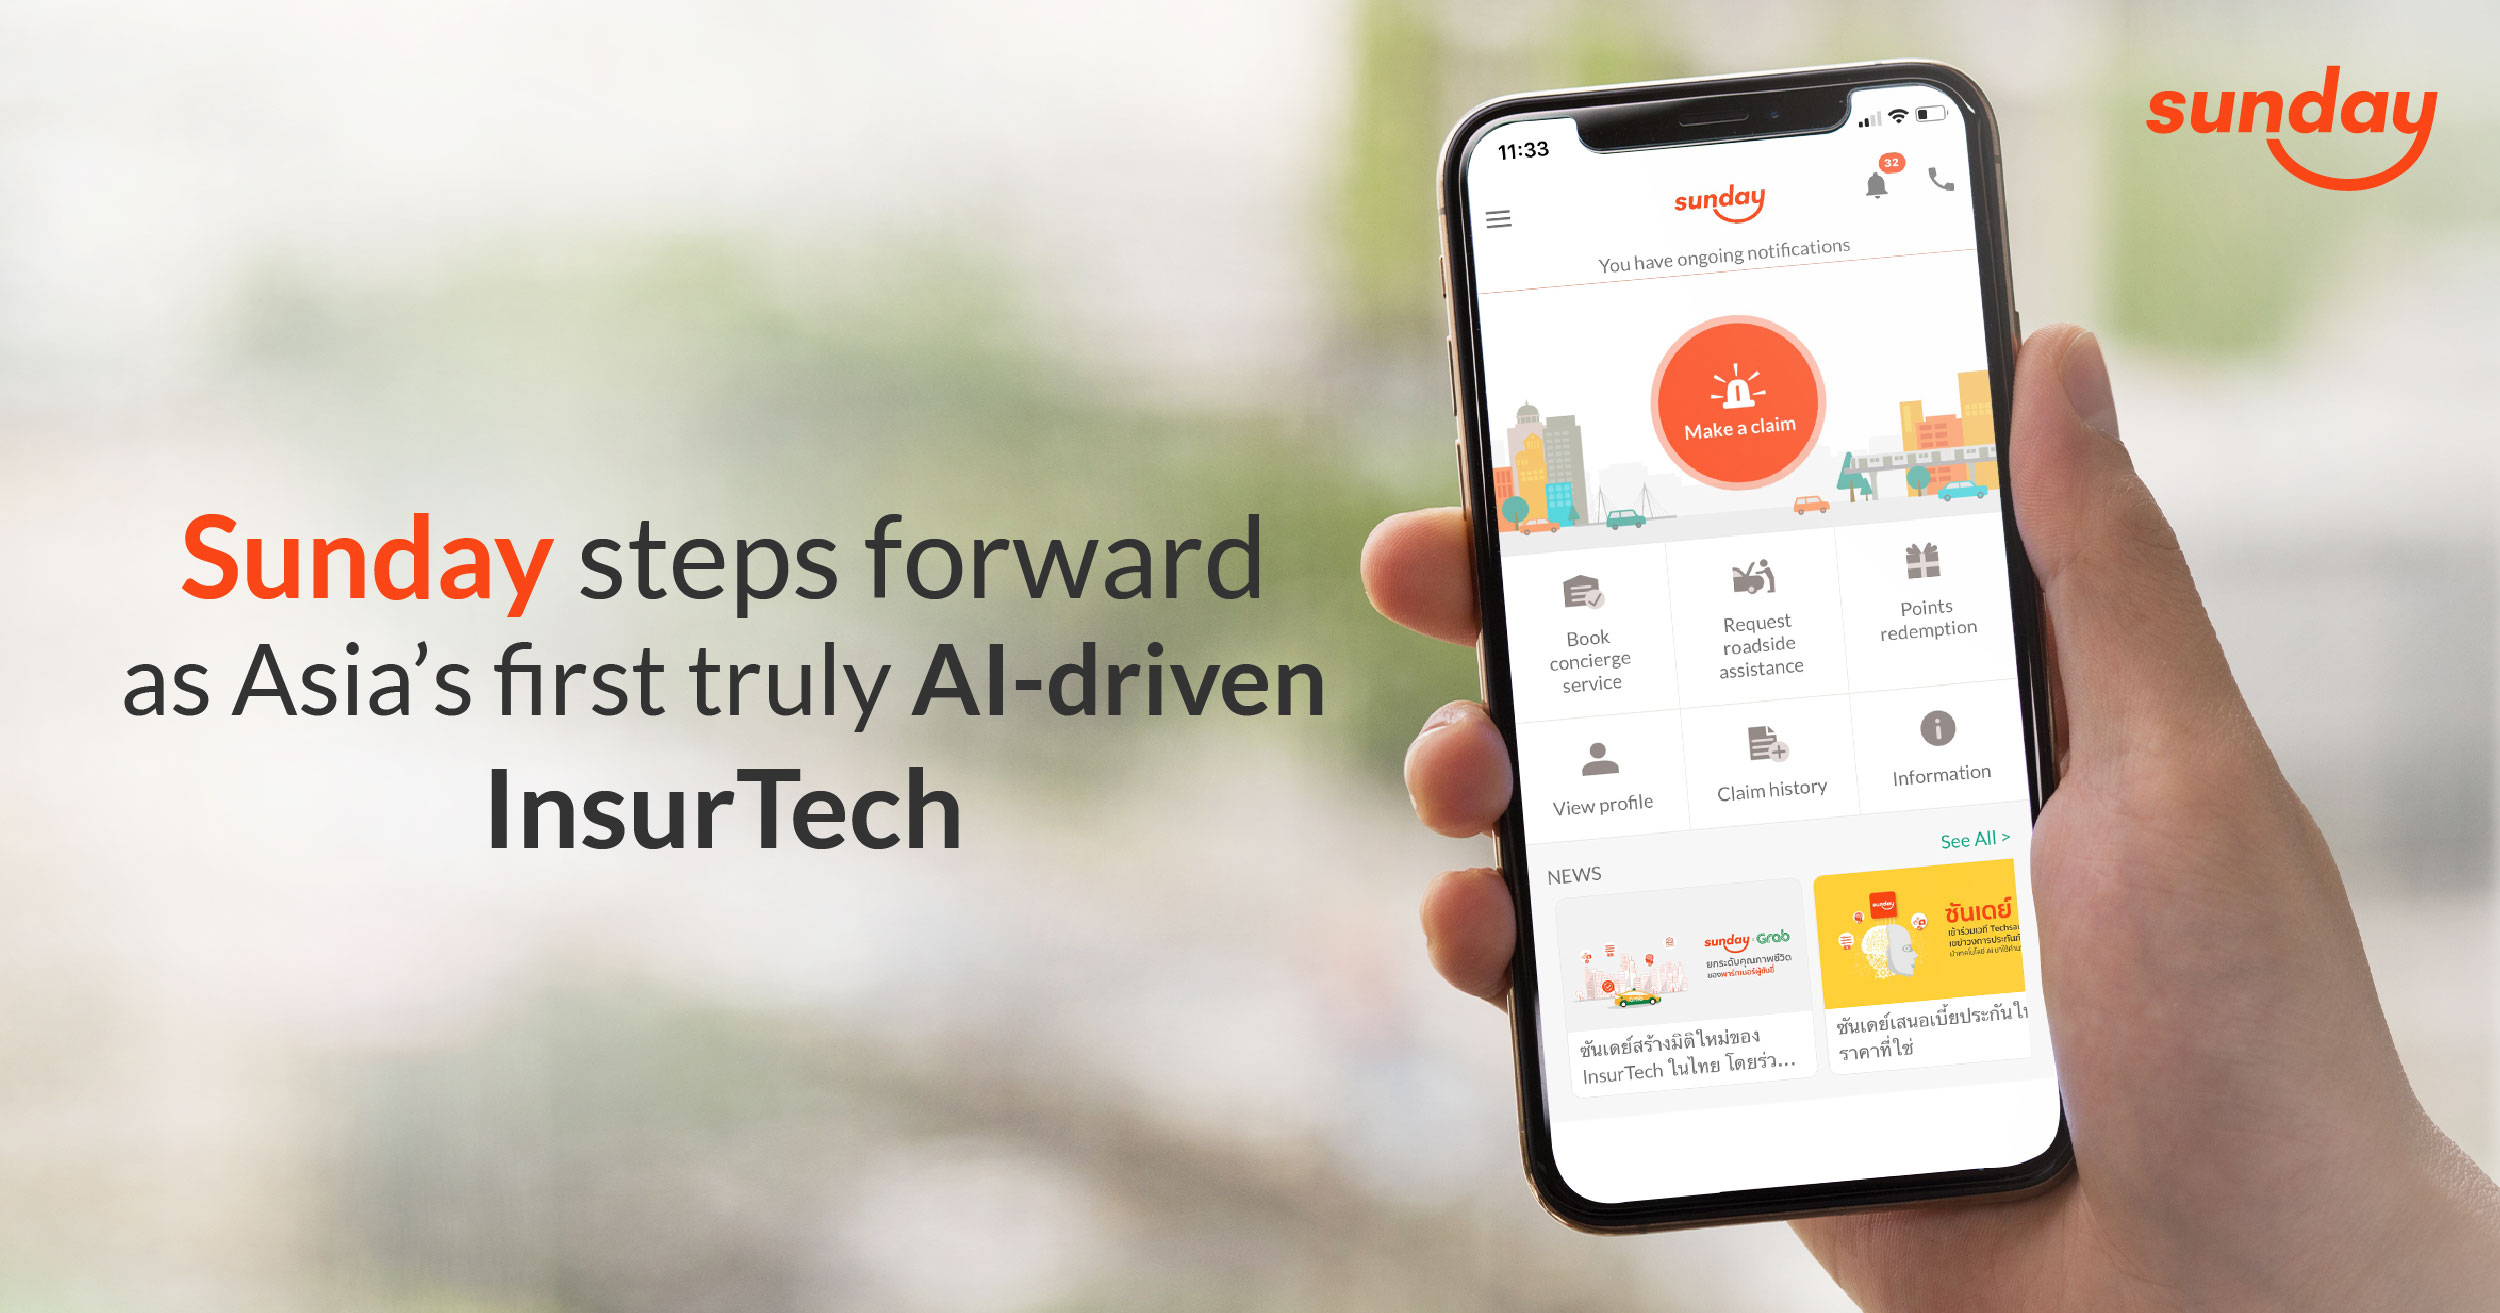 Sunday steps forward as Asia’s first truly AI-driven InsurTech